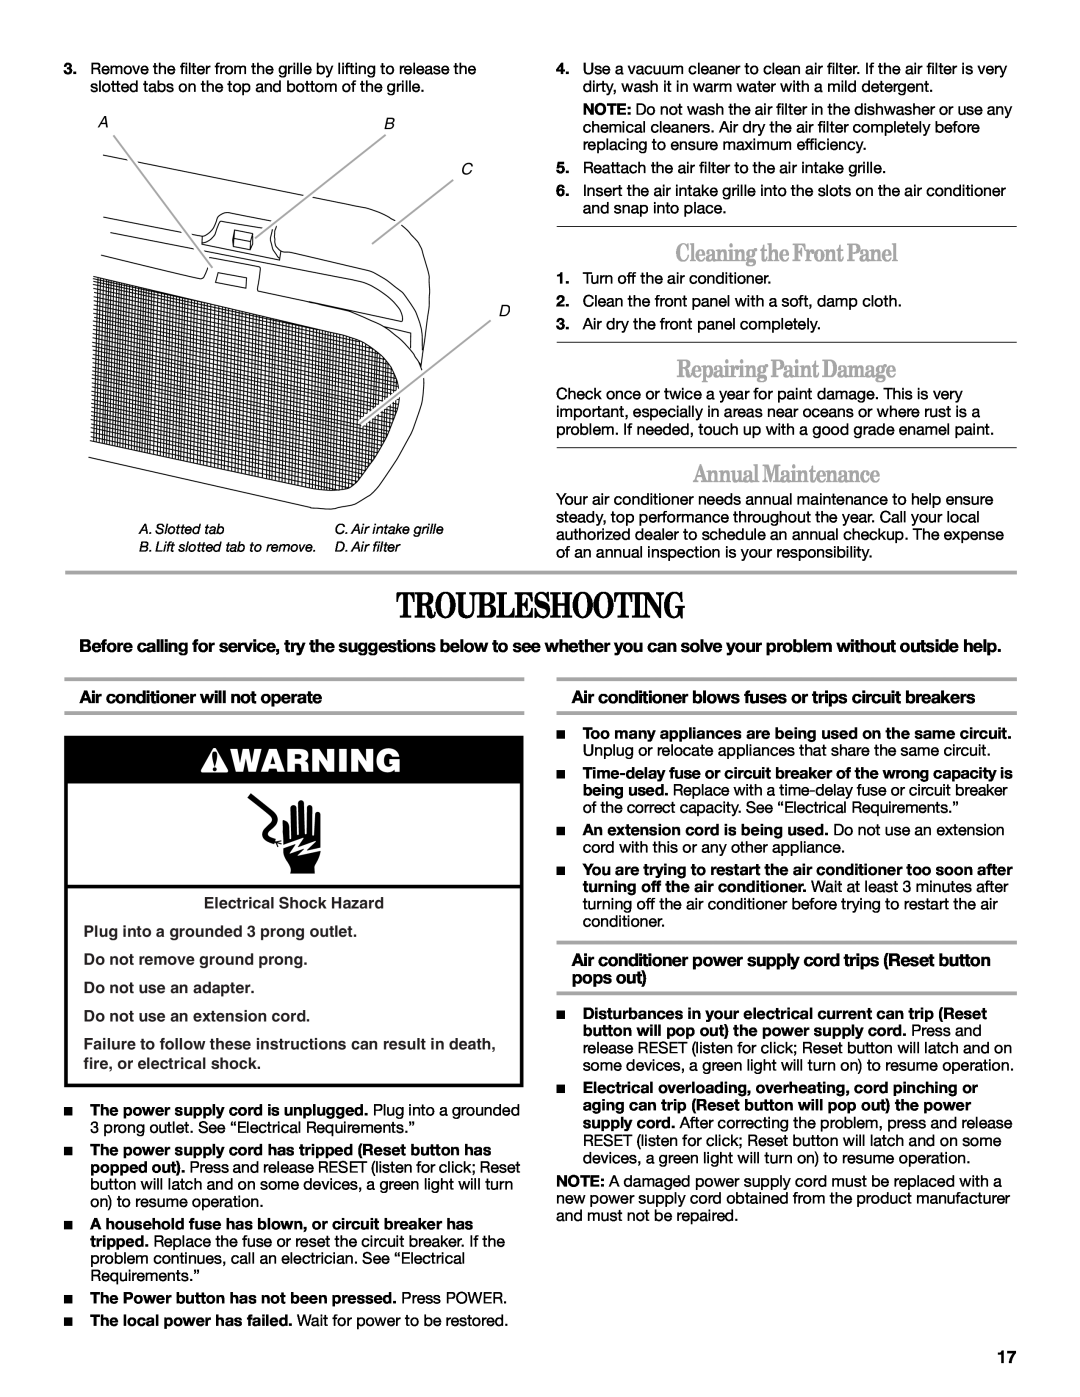 Whirlpool 66161279 manual Troubleshooting, Cleaning the Front Panel, Repairing Paint Damage, Annual Maintenance 